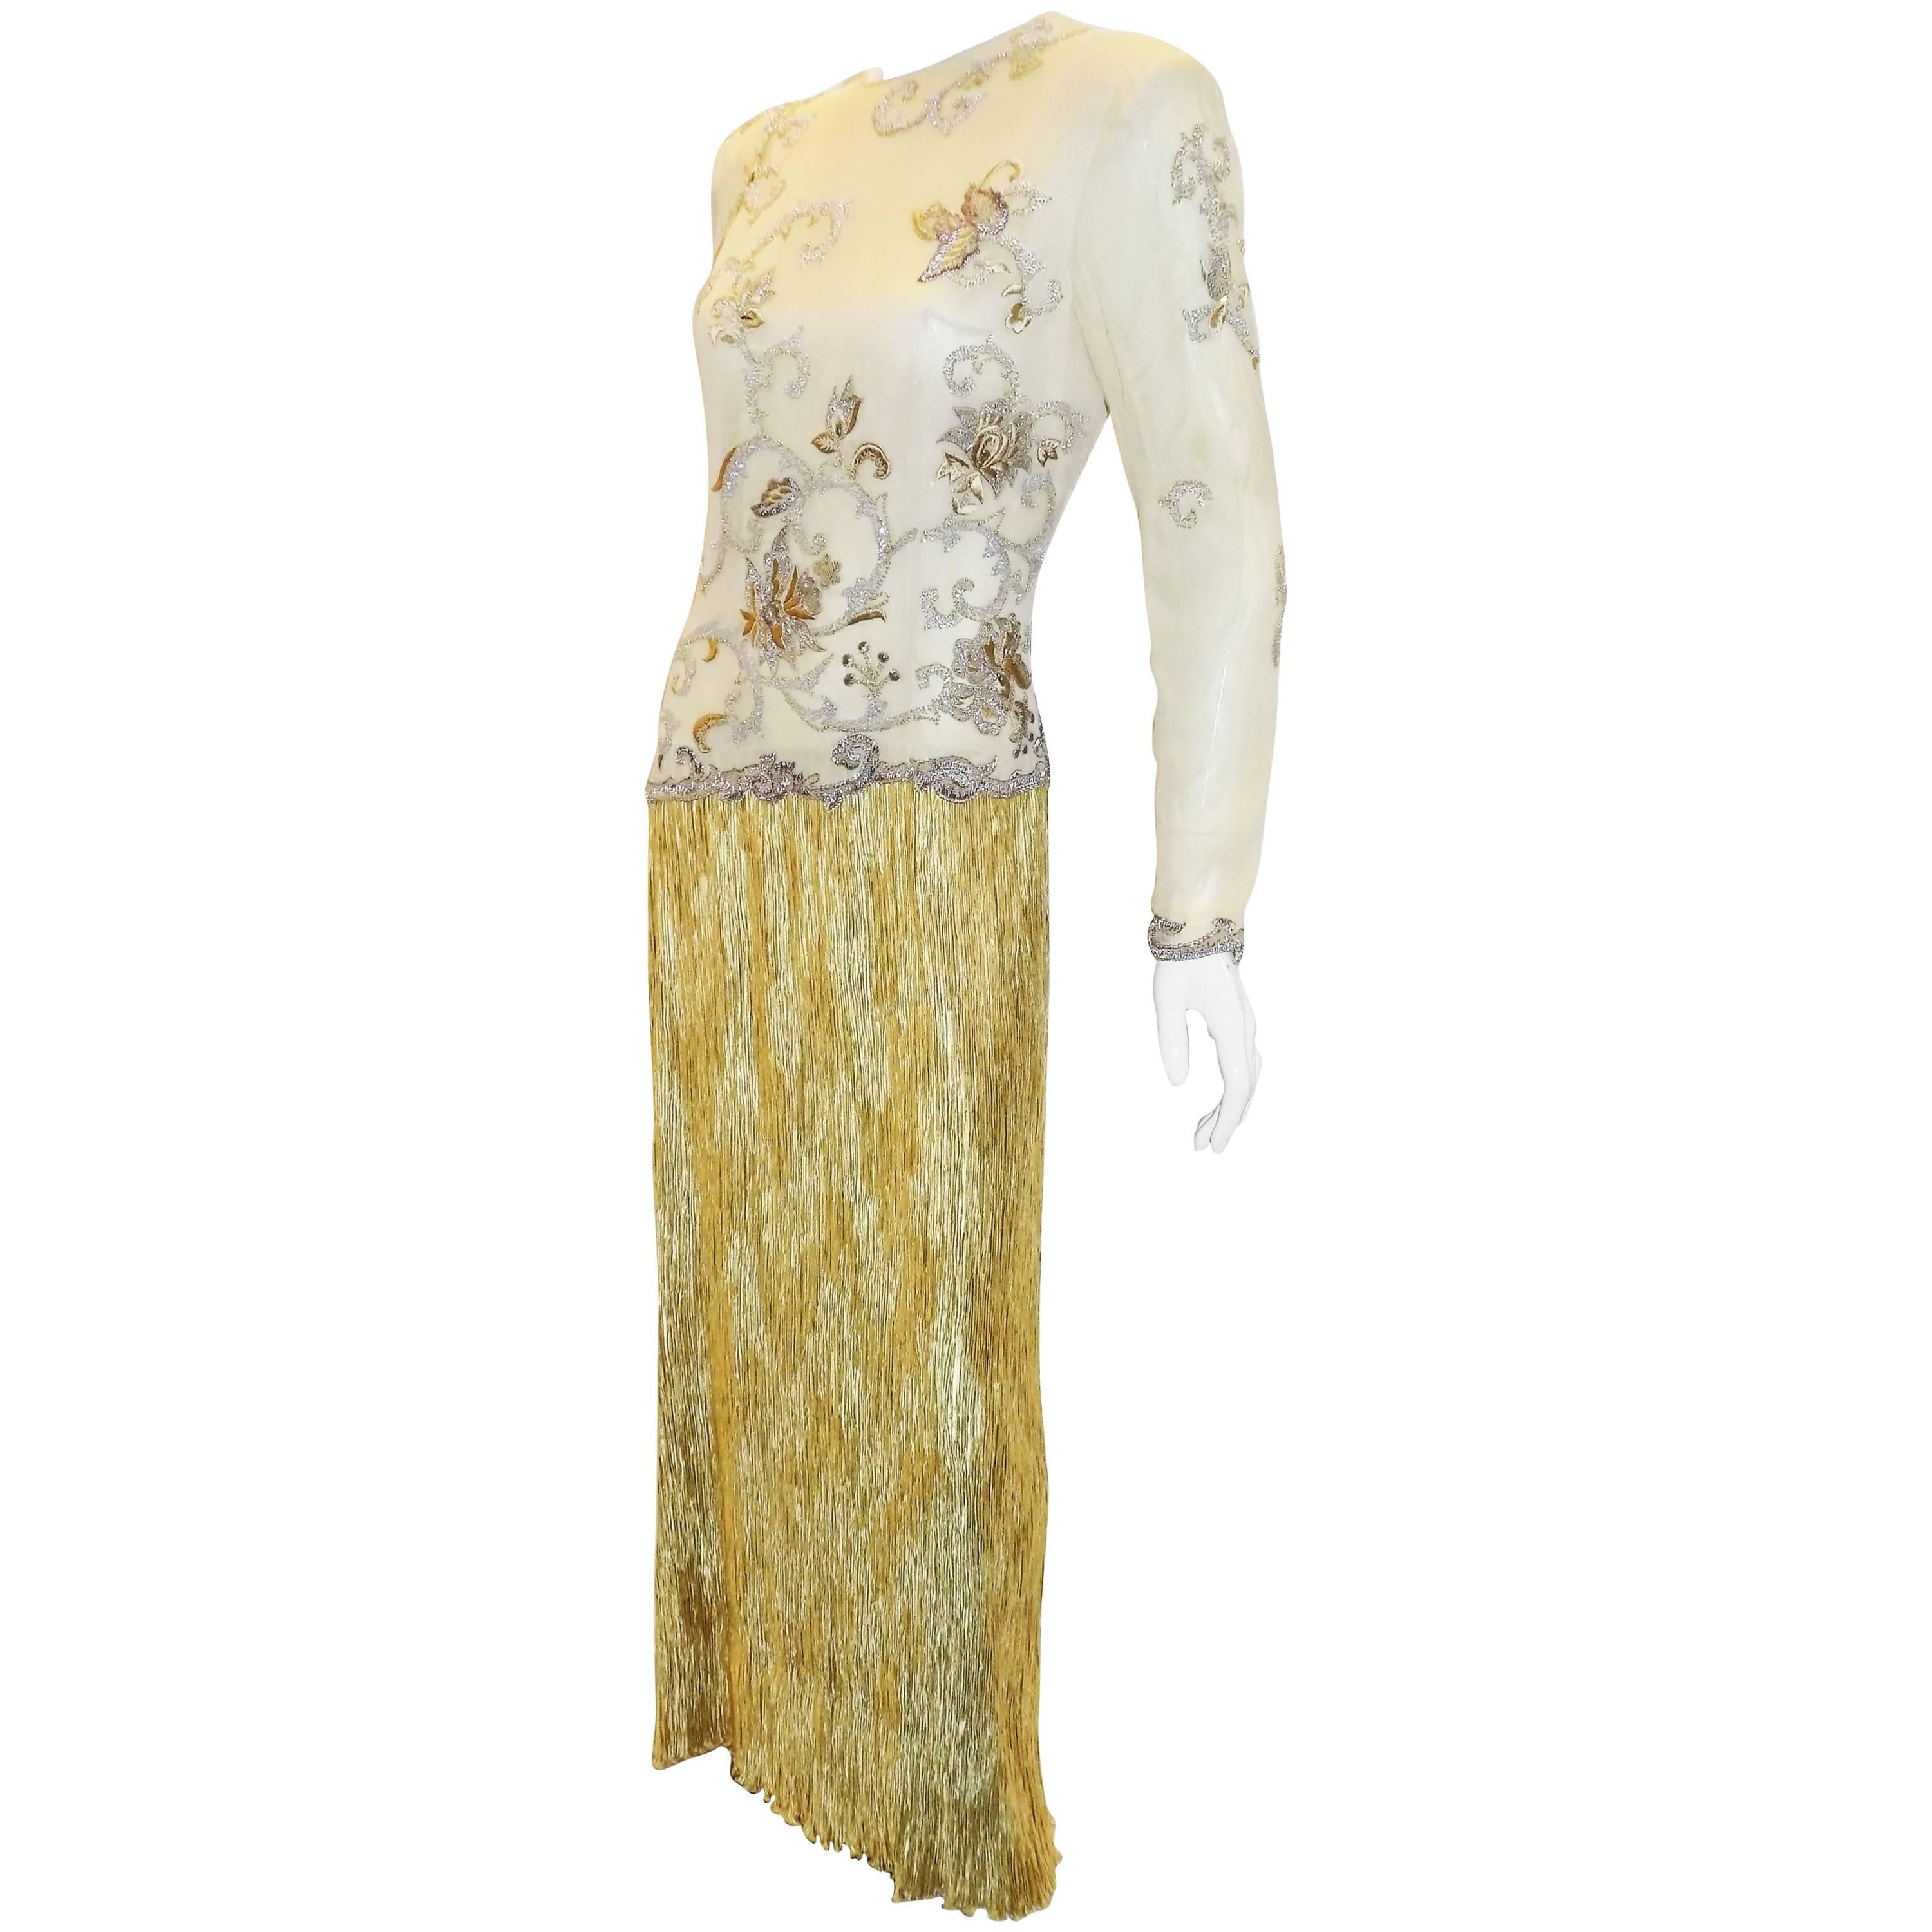 Mary McFadden Couture Gold beaded Bodice with Gold pleated Skirt Gown 